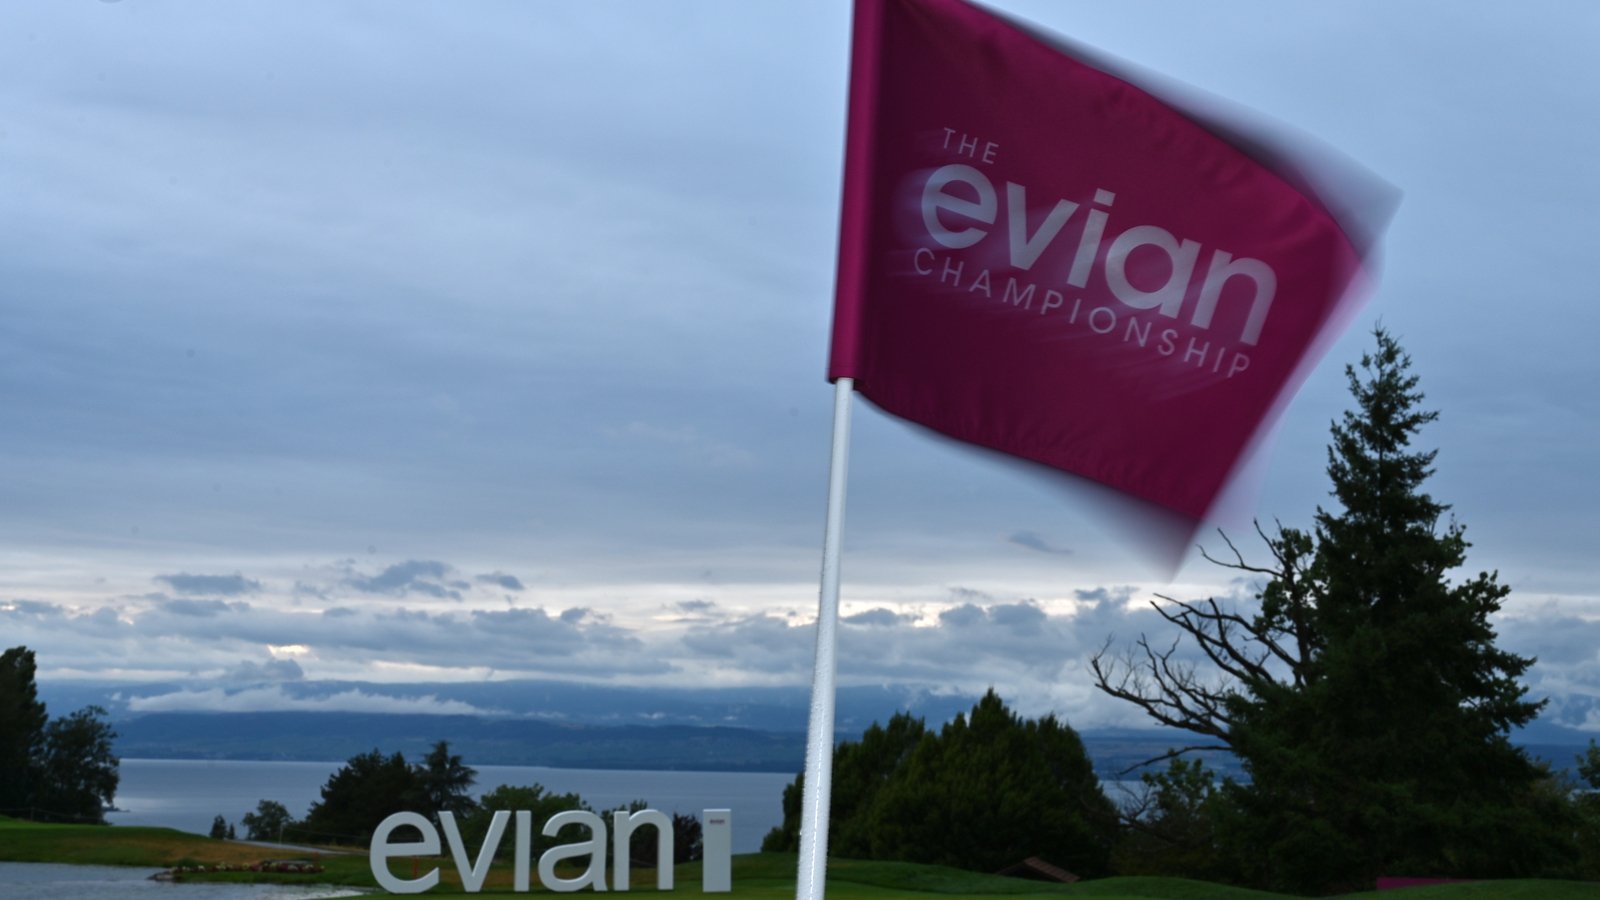 Evian Championship cancelled over safety concerns